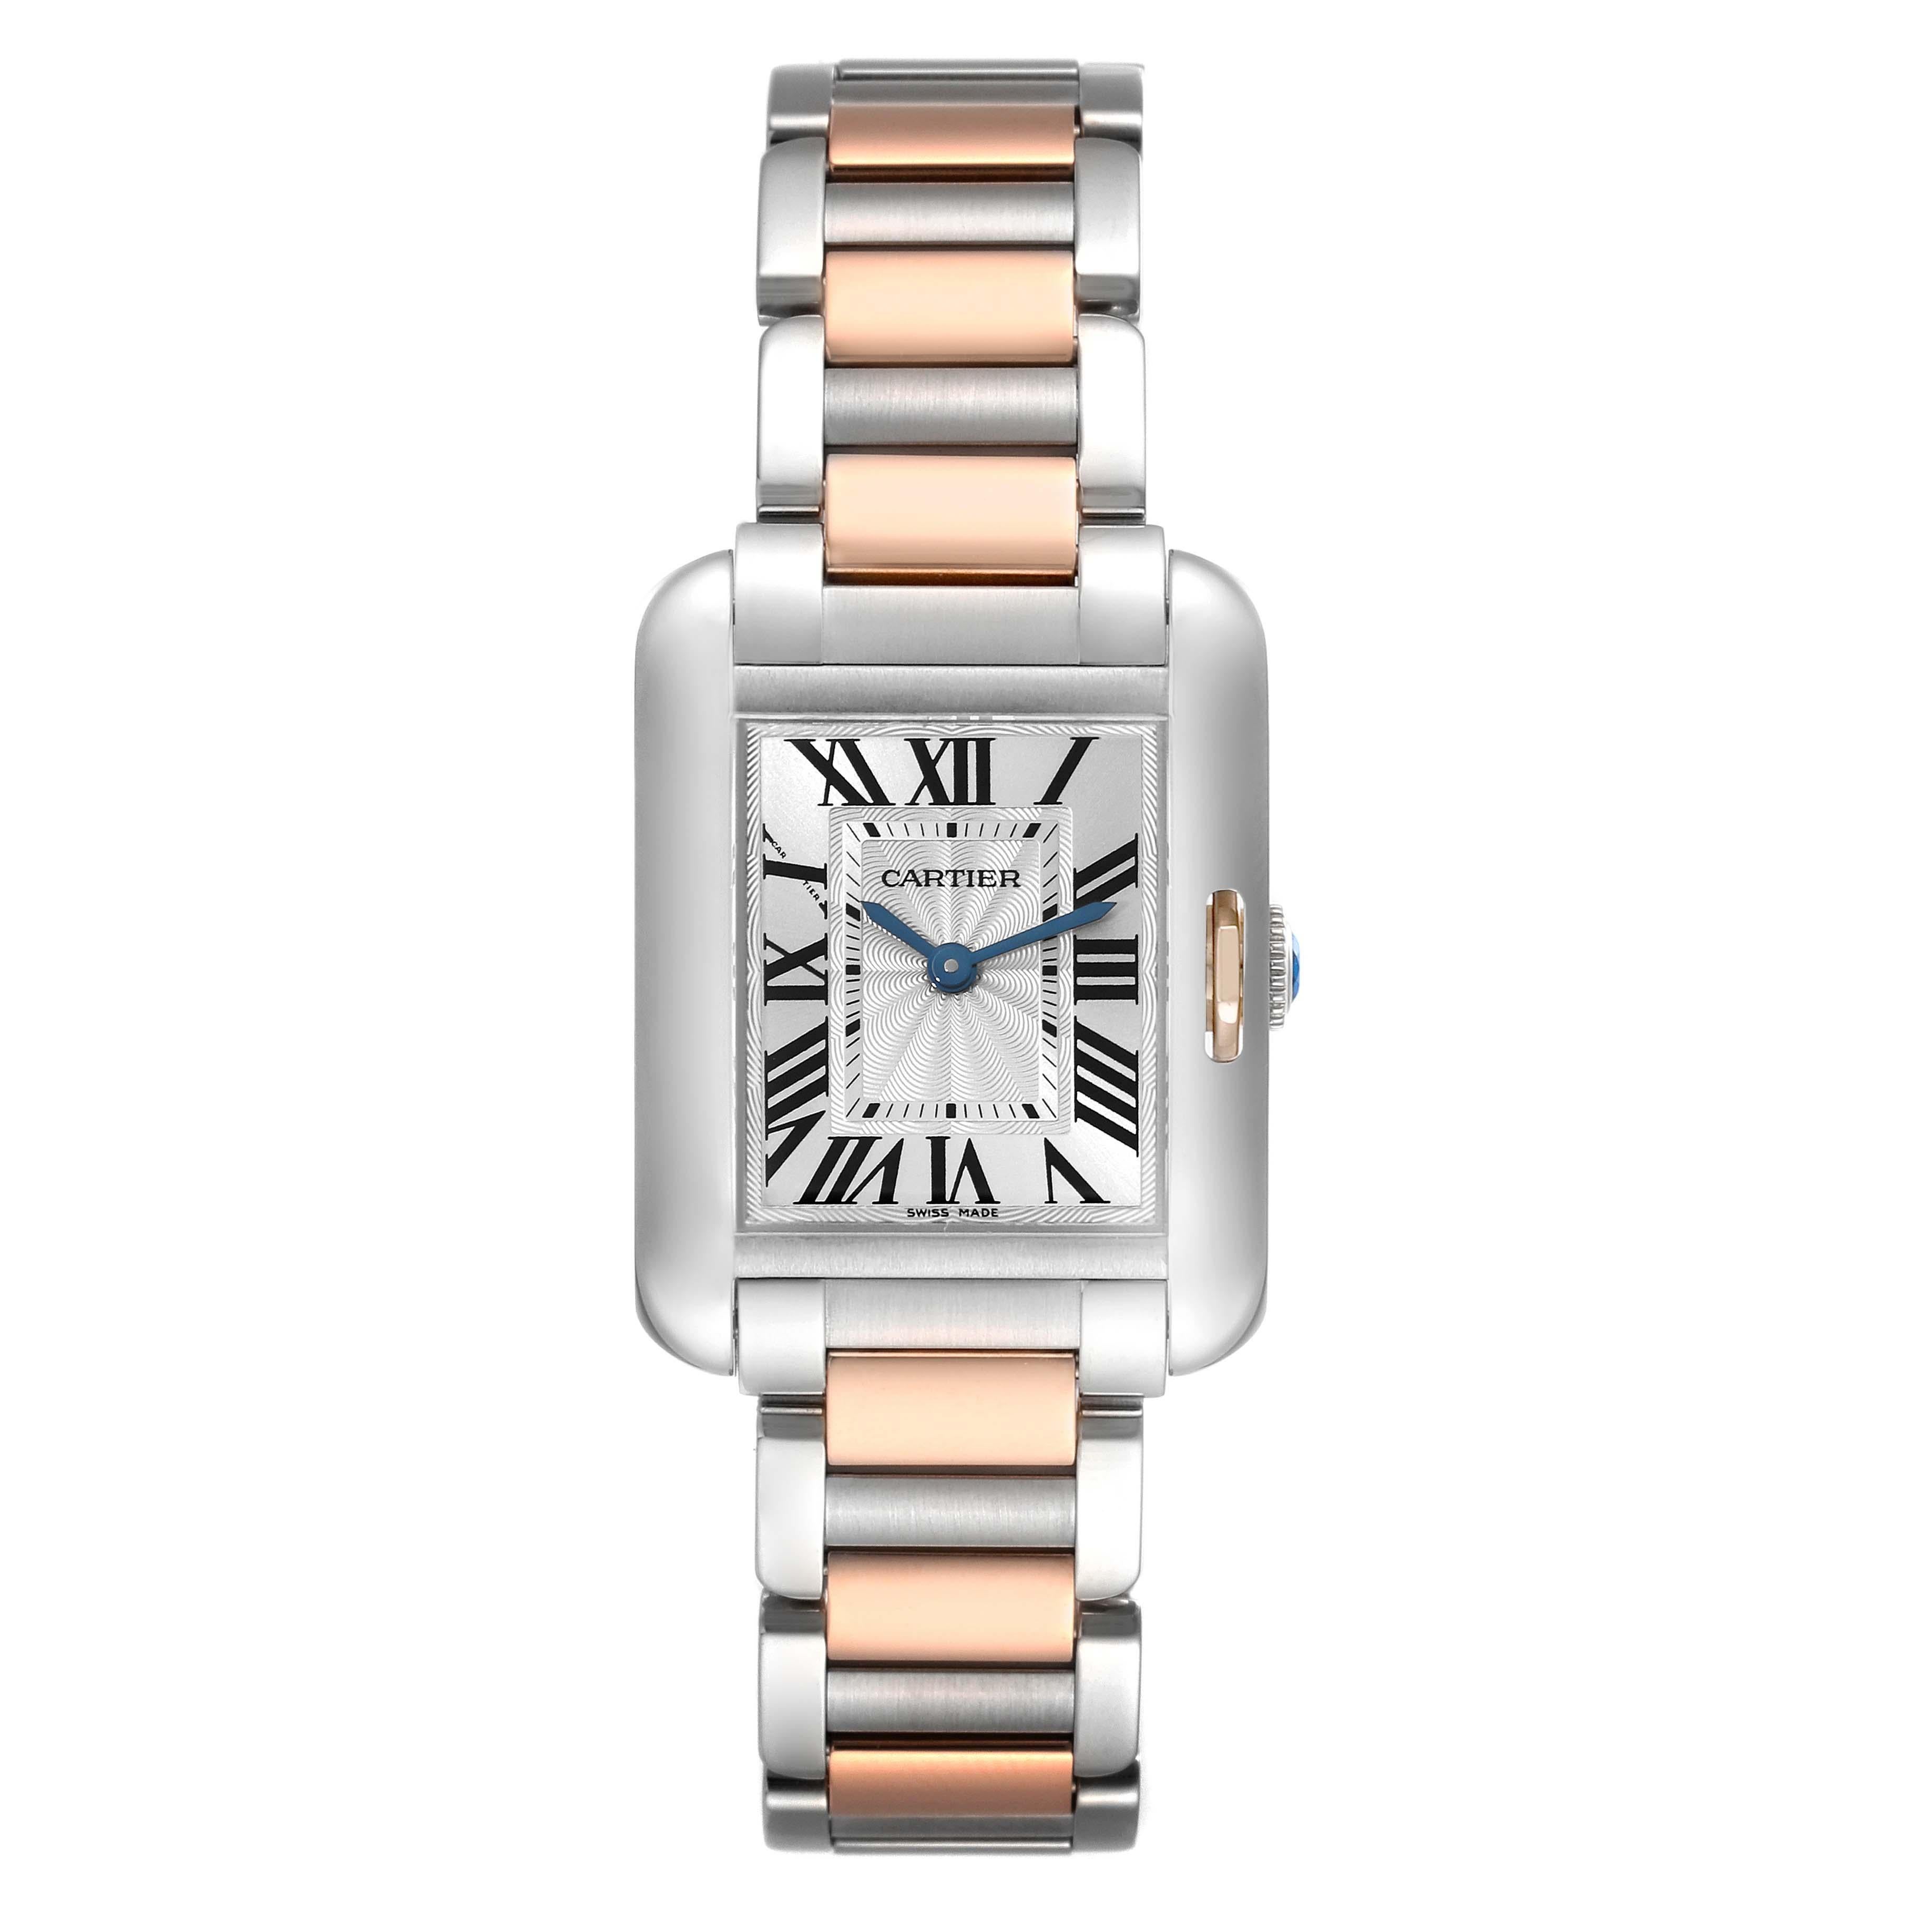 Cartier Tank Anglaise Small Steel Rose Gold Ladies Watch W5310019 Papers. Quartz movement. Stainless steel and 18K rose gold case 30.2 x 22.7 mm. Circular grained crown set with blue spinel. . Scratch resistant sapphire crystal. Flinque silver dial